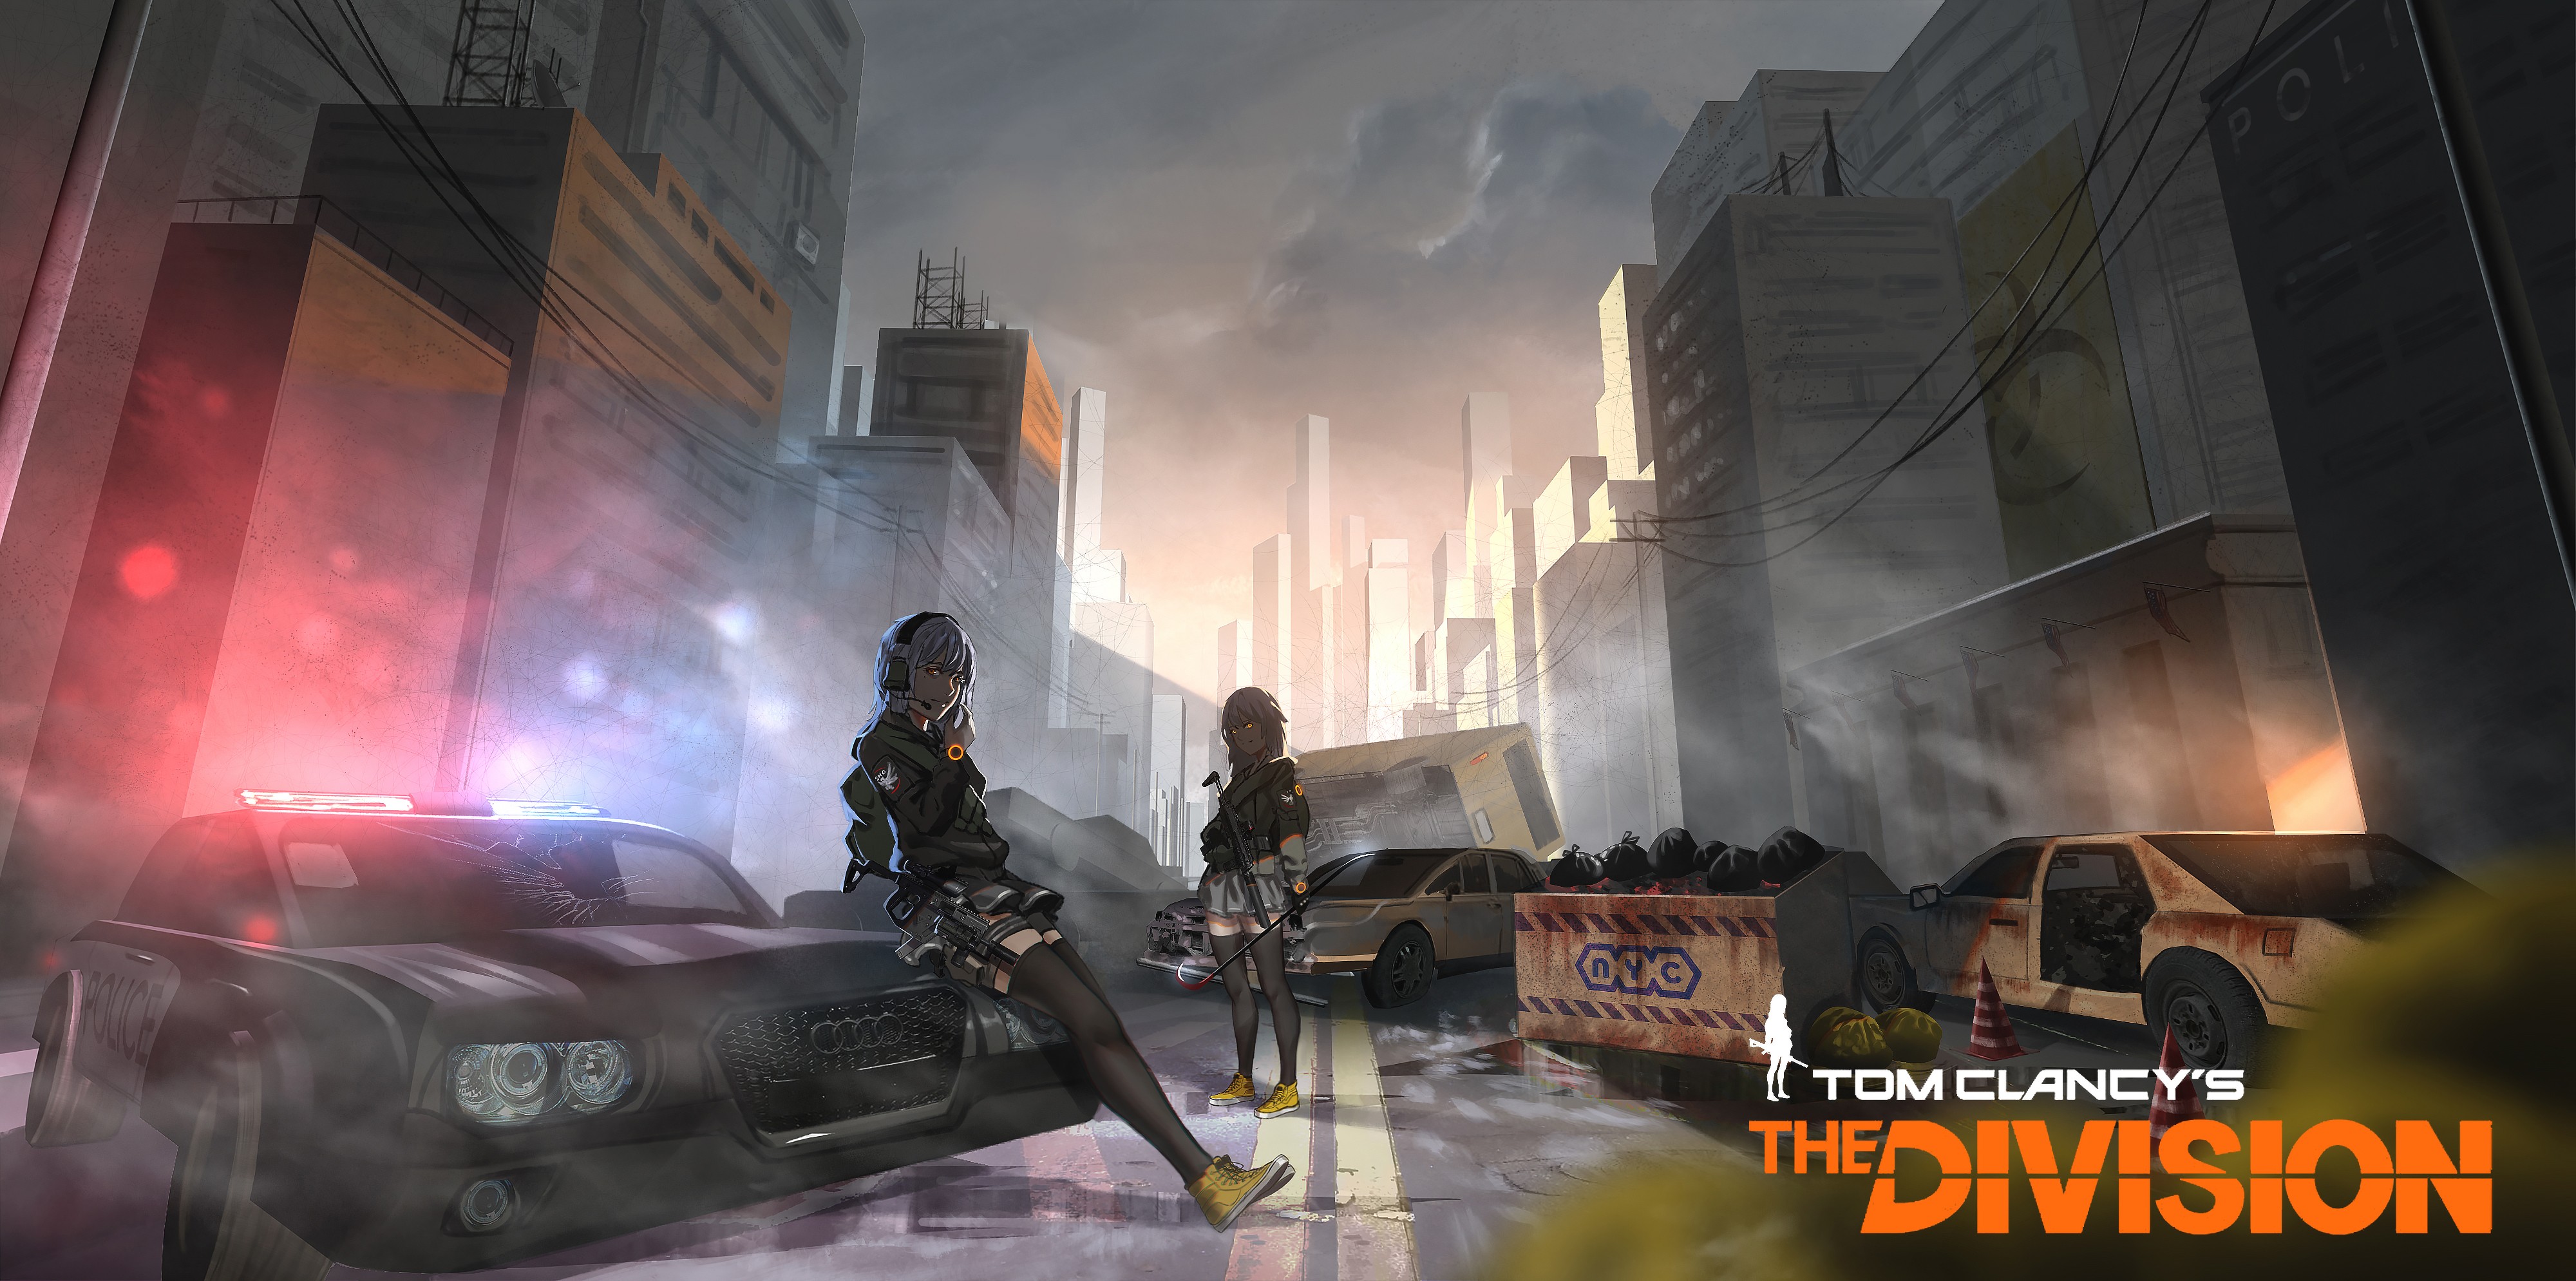 Anime 4000x1989 anime anime girls Tom Clancy's The Division weapon zettai ryouiki original characters video games PC gaming Pixiv video game art fan art car women with cars